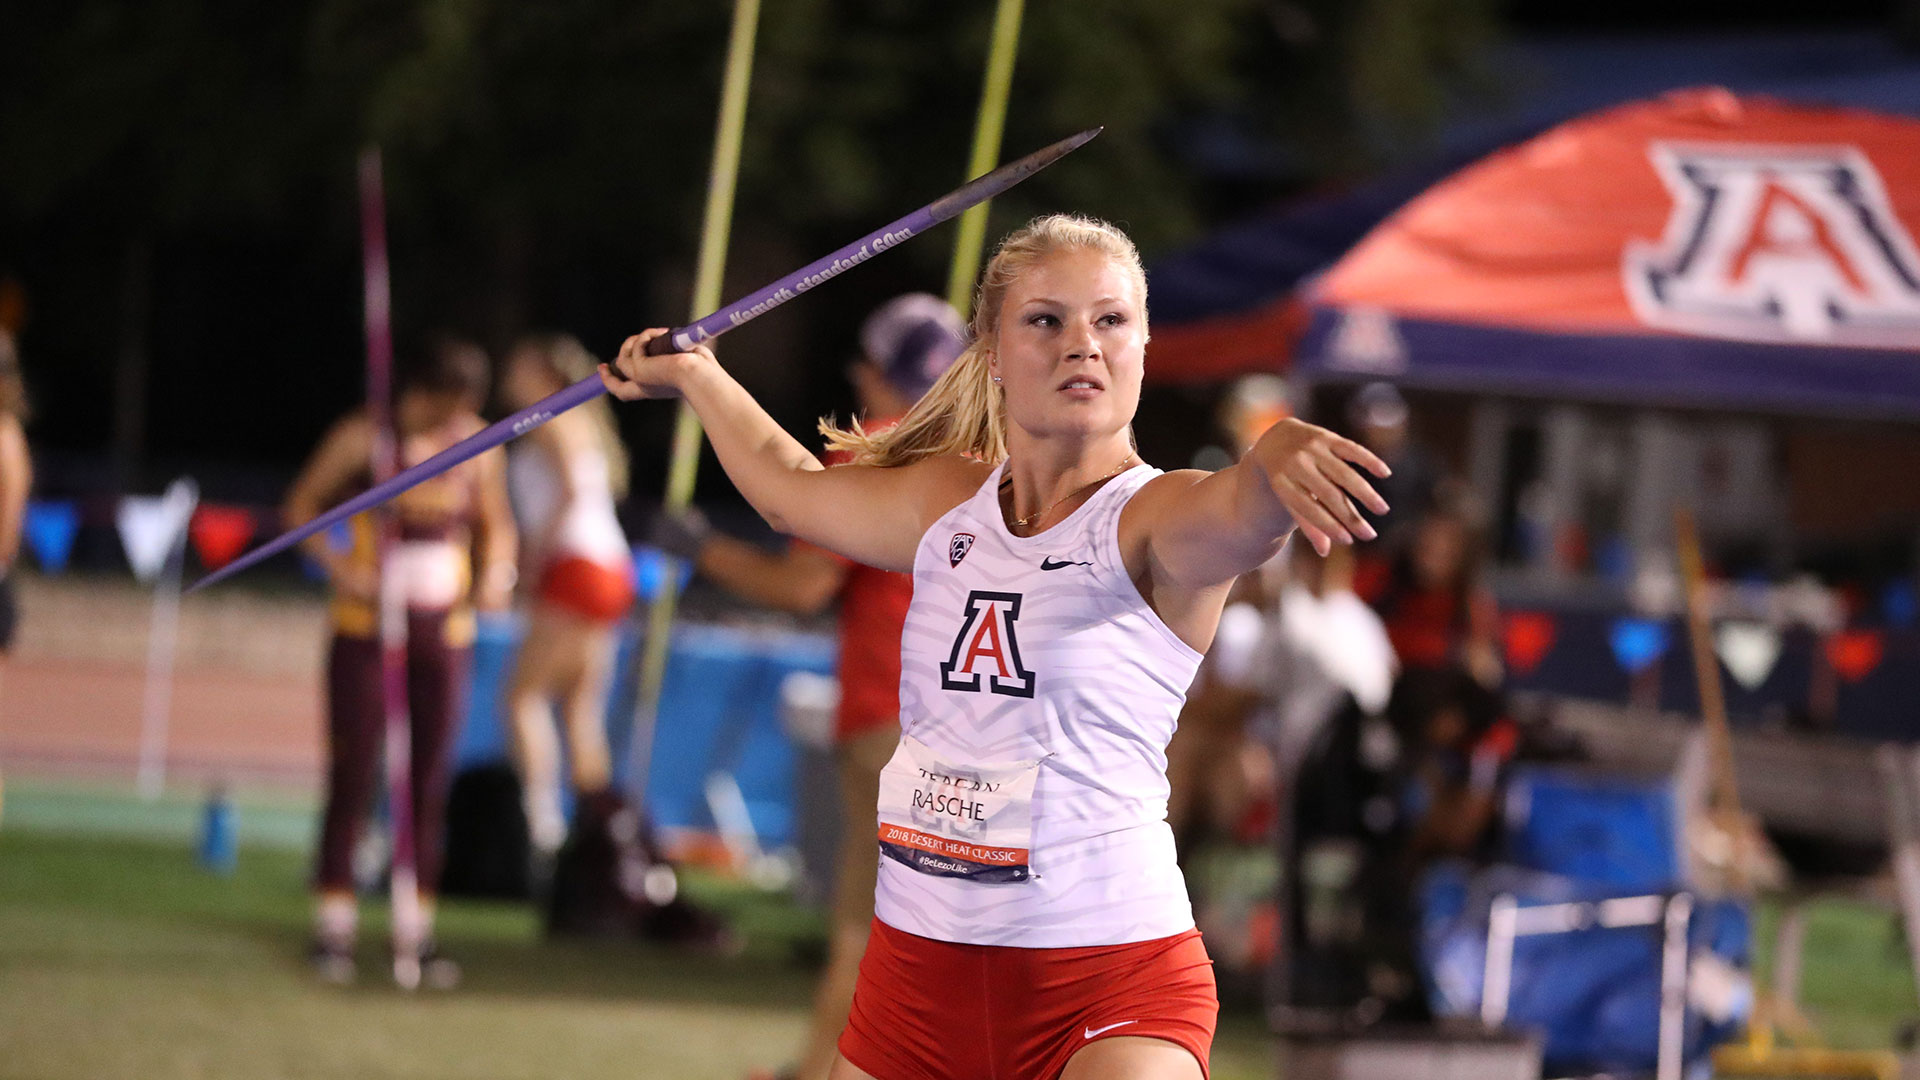 Teagan Rasche competing for the University of Arizona track team. Spring 2019